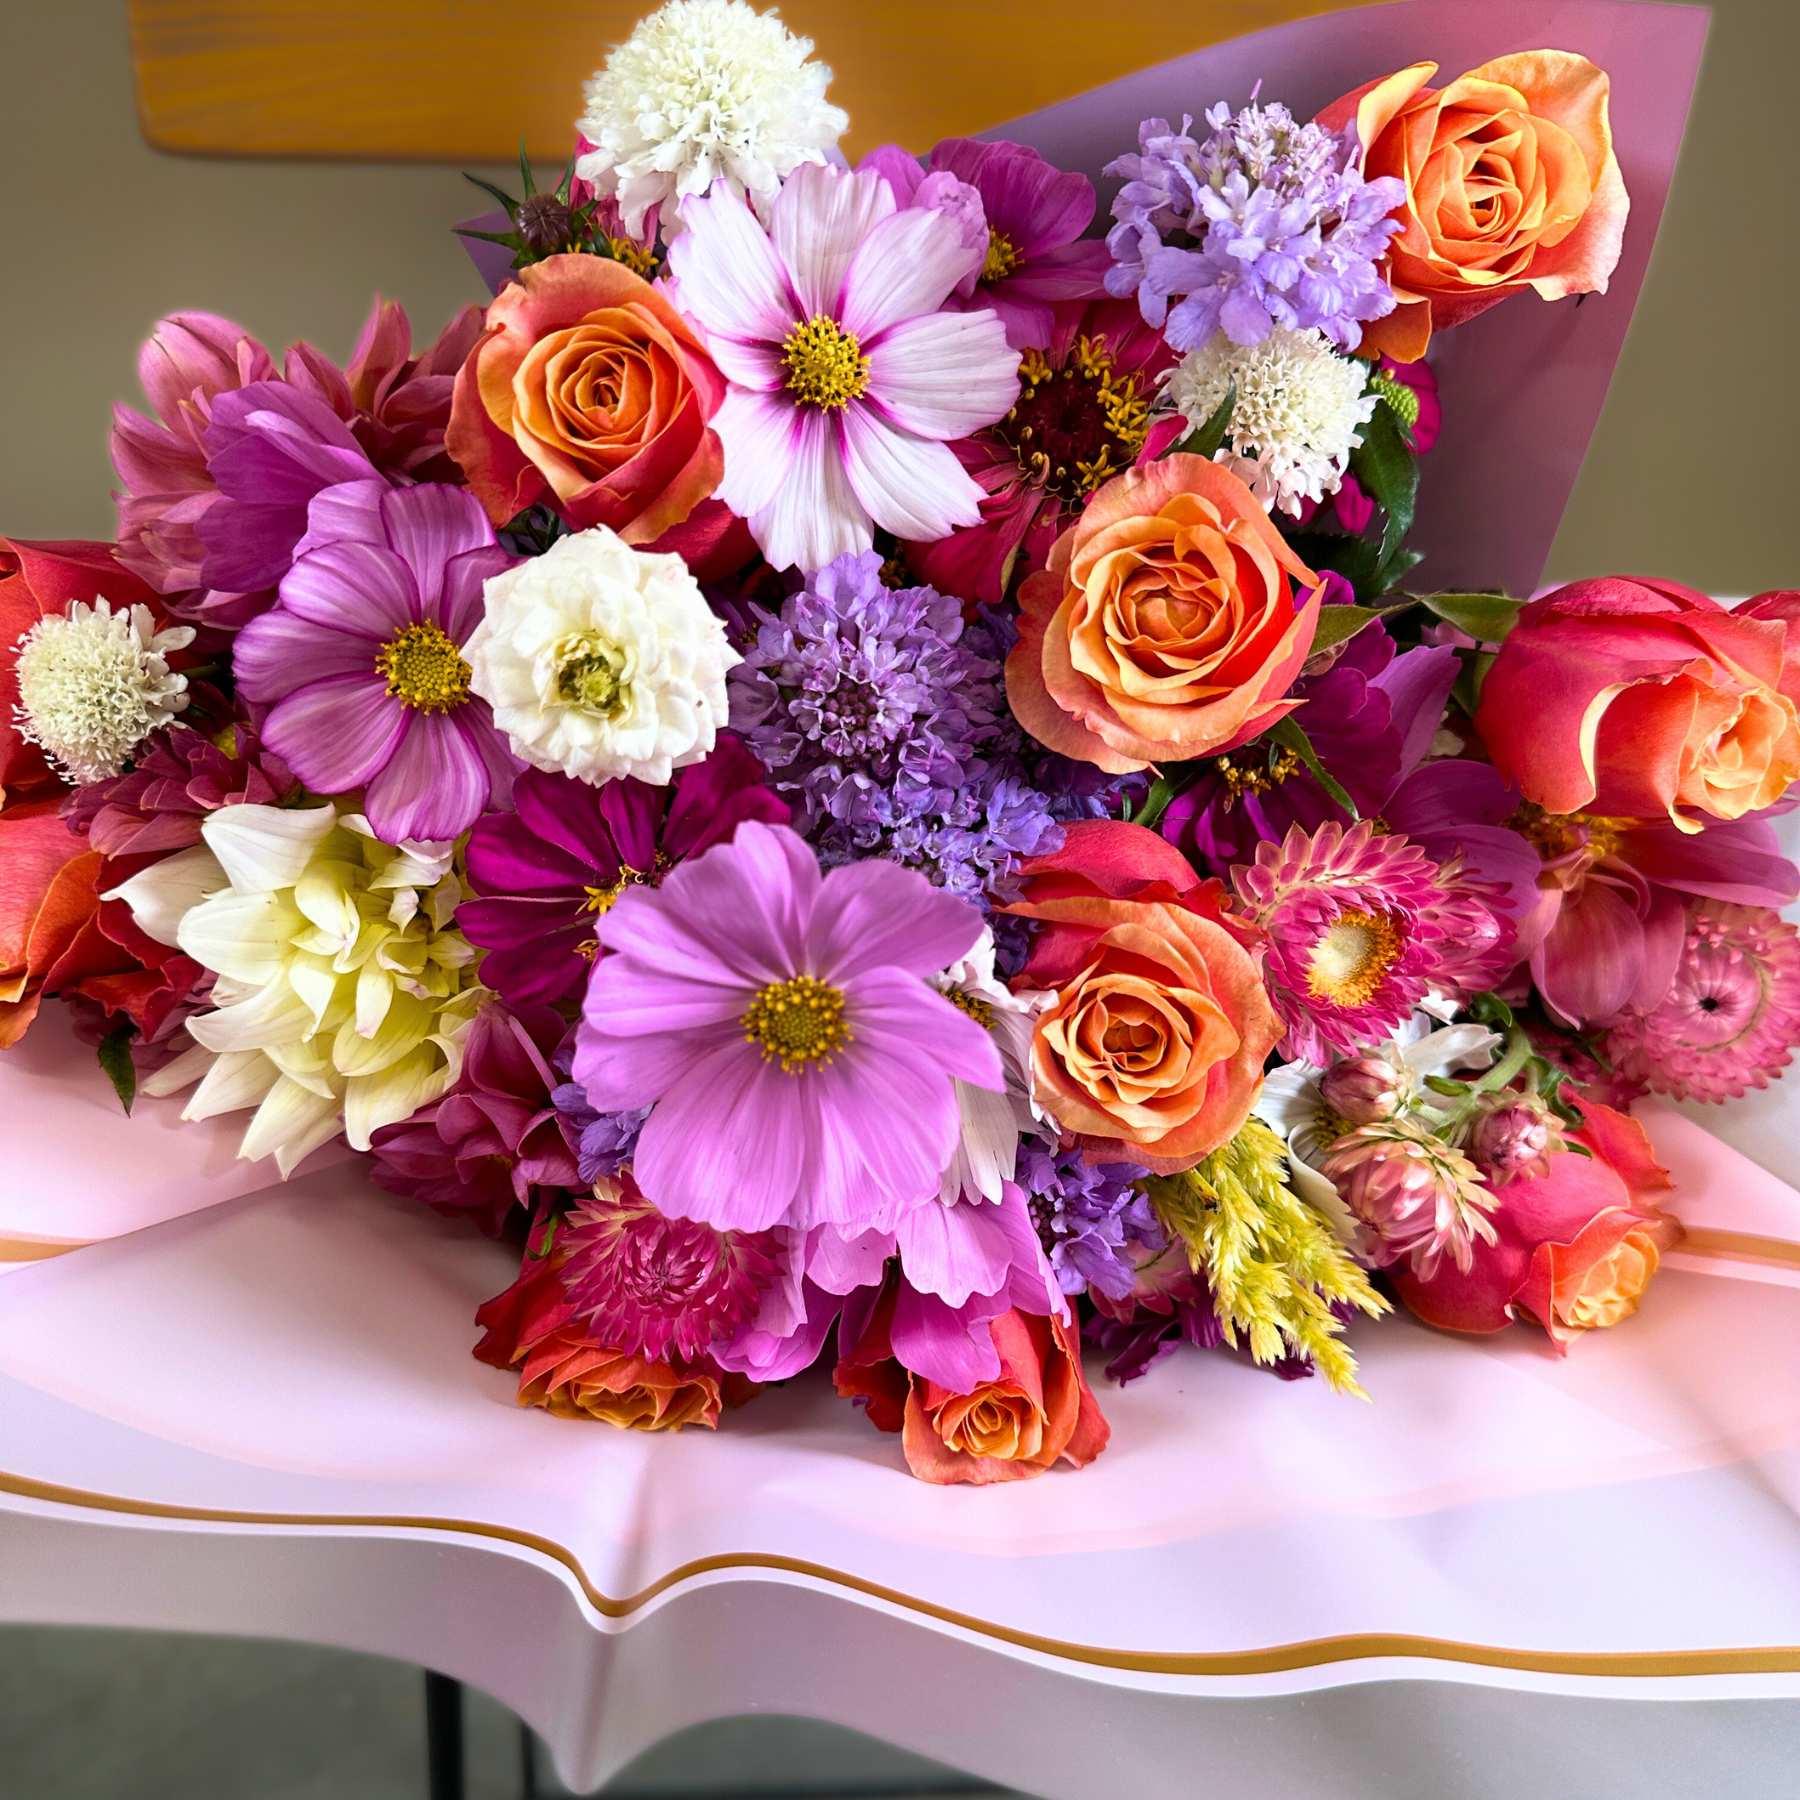 Close-up of the Lush Wonder Flower Bouquet featuring a vibrant assortment of roses, daisies, and other seasonal blooms, wrapped in a stylish pink paper, available at Fabulous Flowers and Gifts.